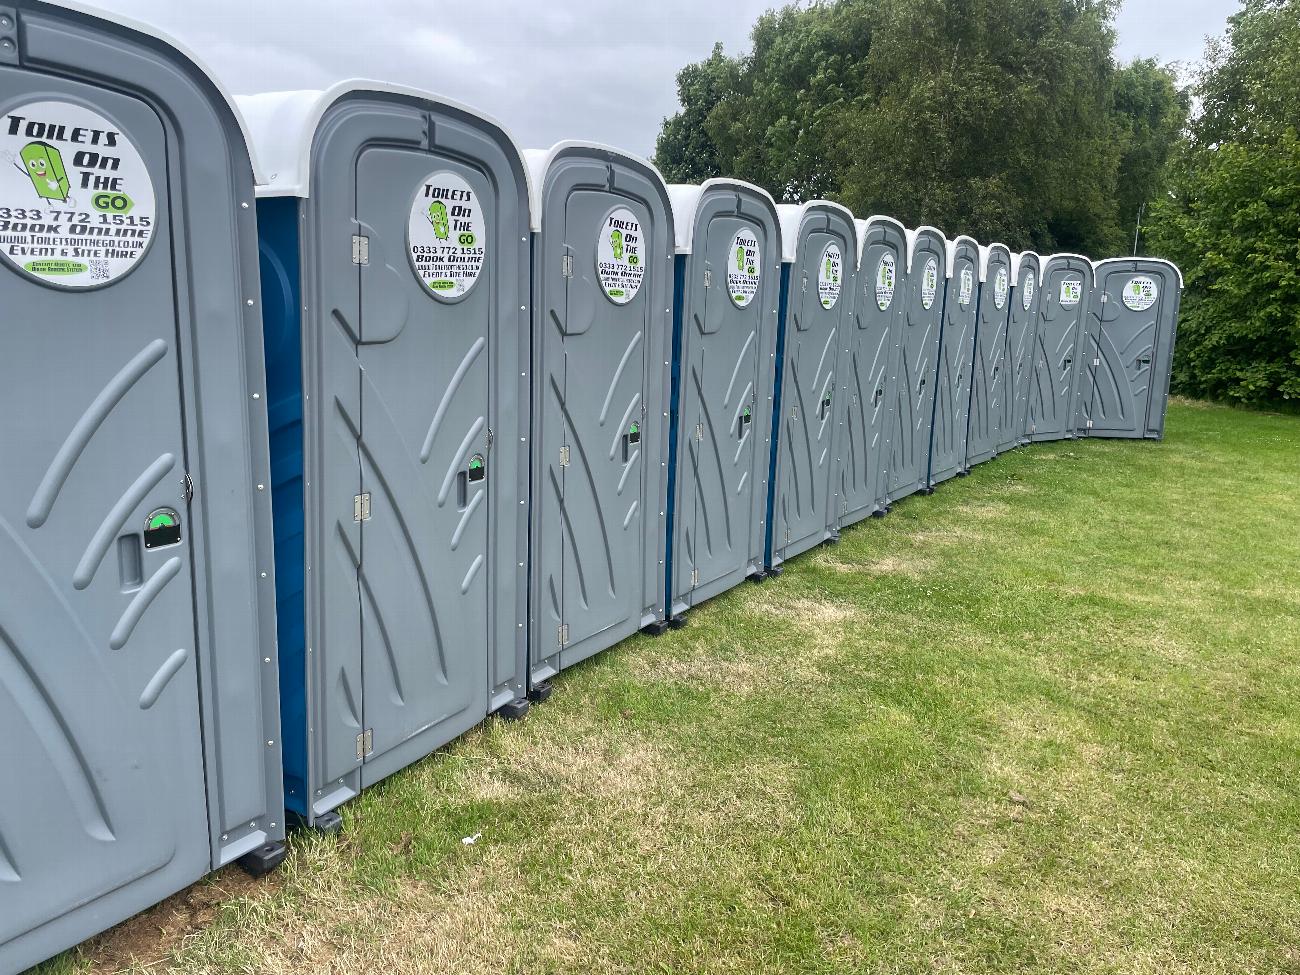 Gallery | Portable Toilet Loo Hire Rental Company in North West uk and Manchester gallery image 4